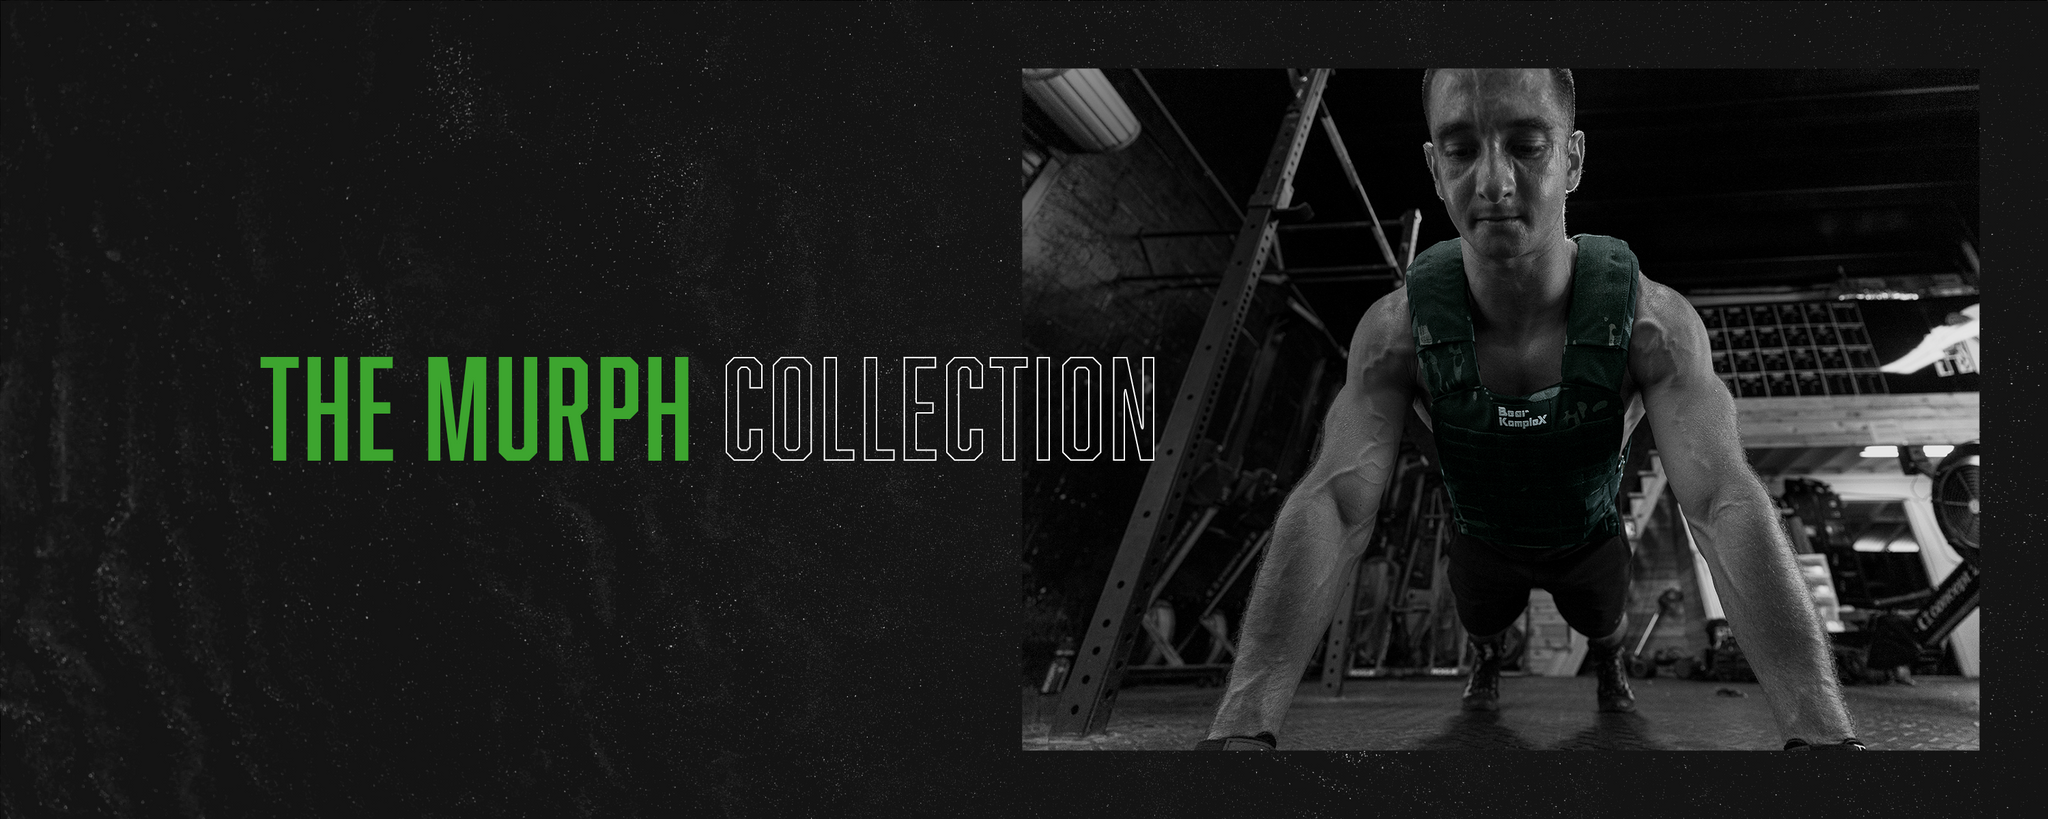 The Murph Collection